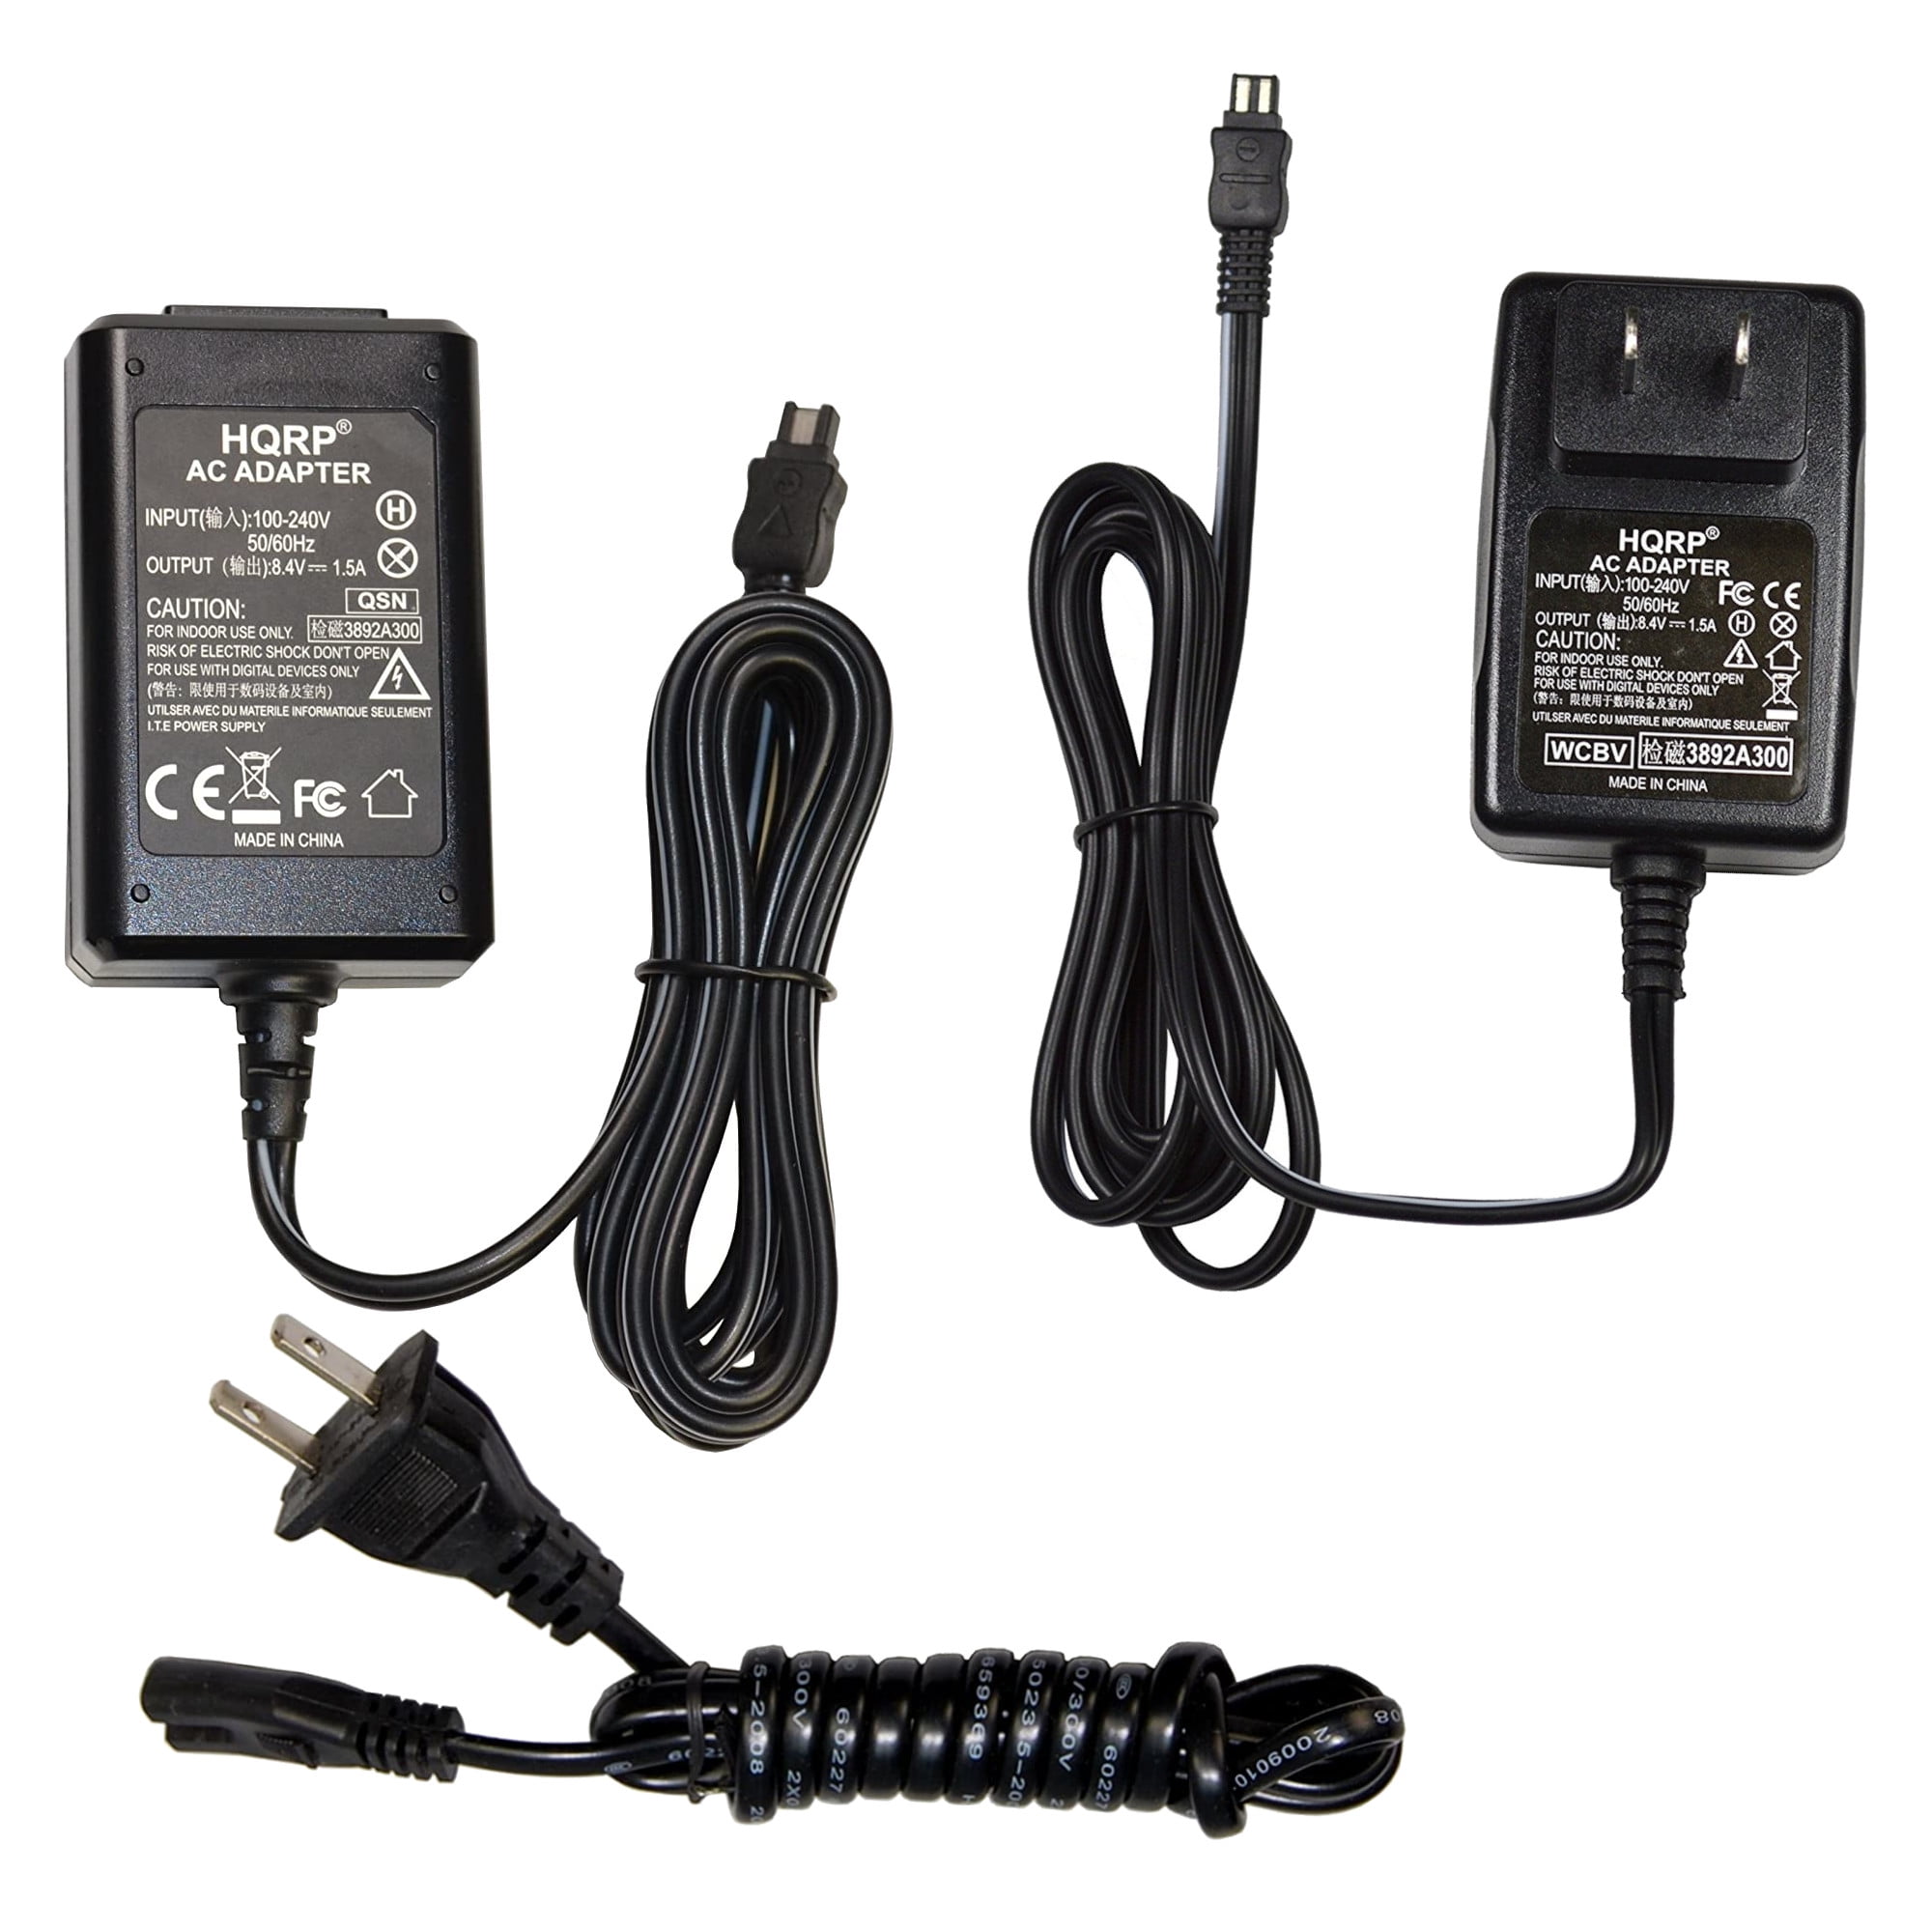 AC Adapter Power Cord for Sony HandyCam Camcorder DCR-SX41/R Power Supply Cord Cable AC DC Adapter Charger